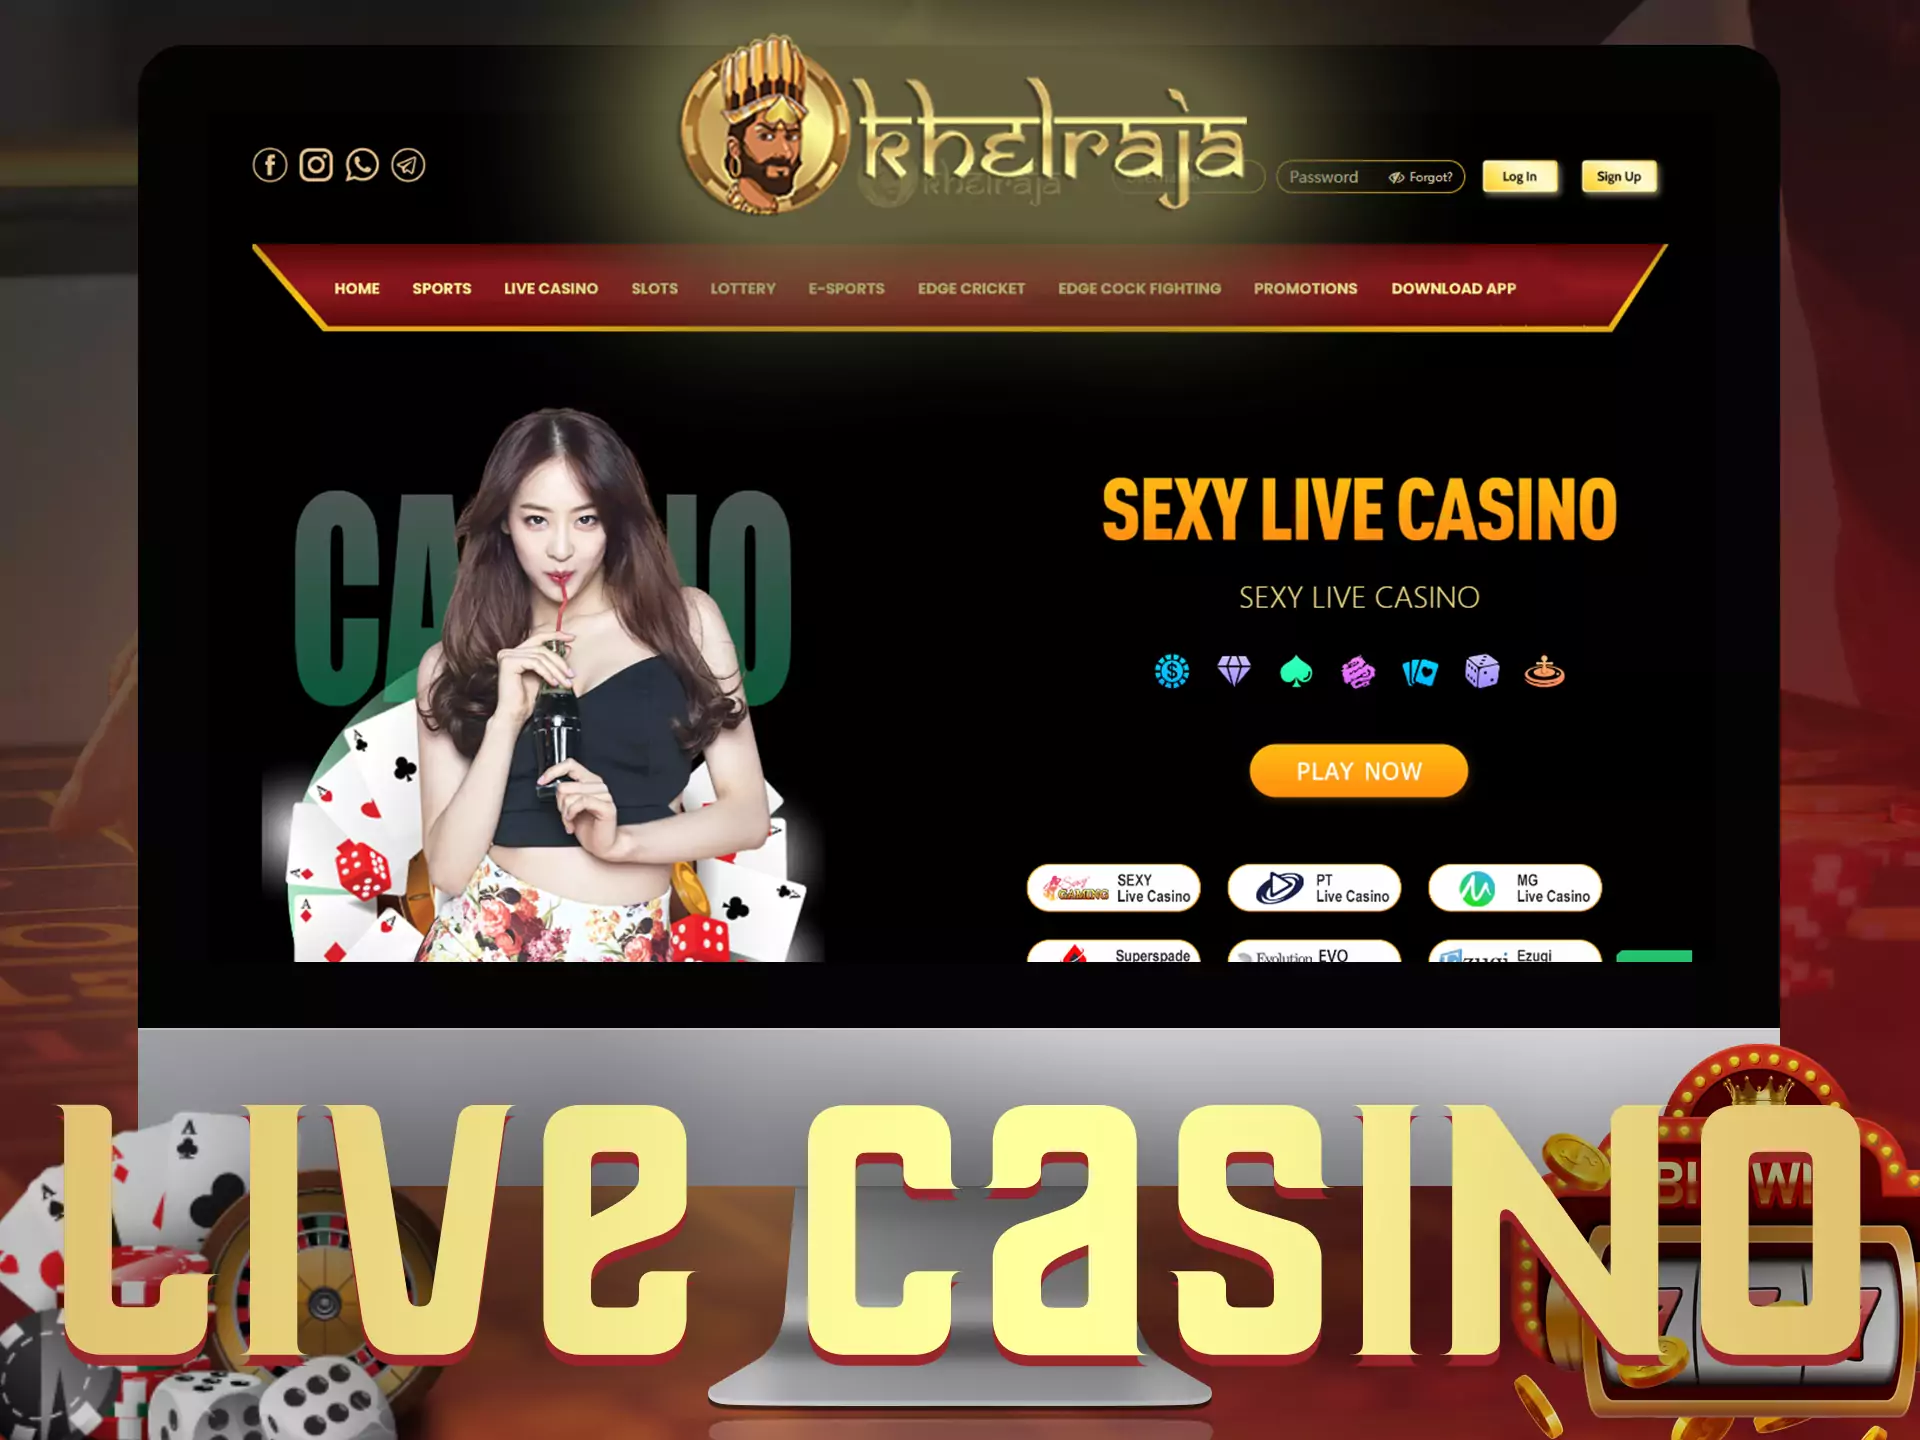 In the Khelraja Live Casino, you can play online with real dealers.